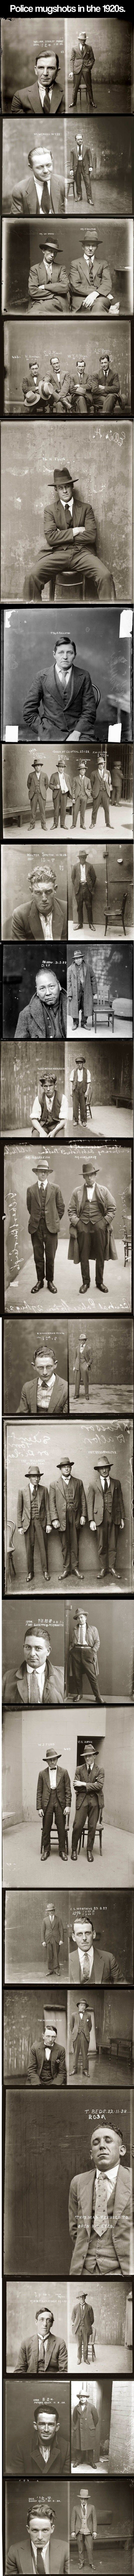 Police mugshots in the 1920s… – One Stop Humor: Funny Pictures and Videos!